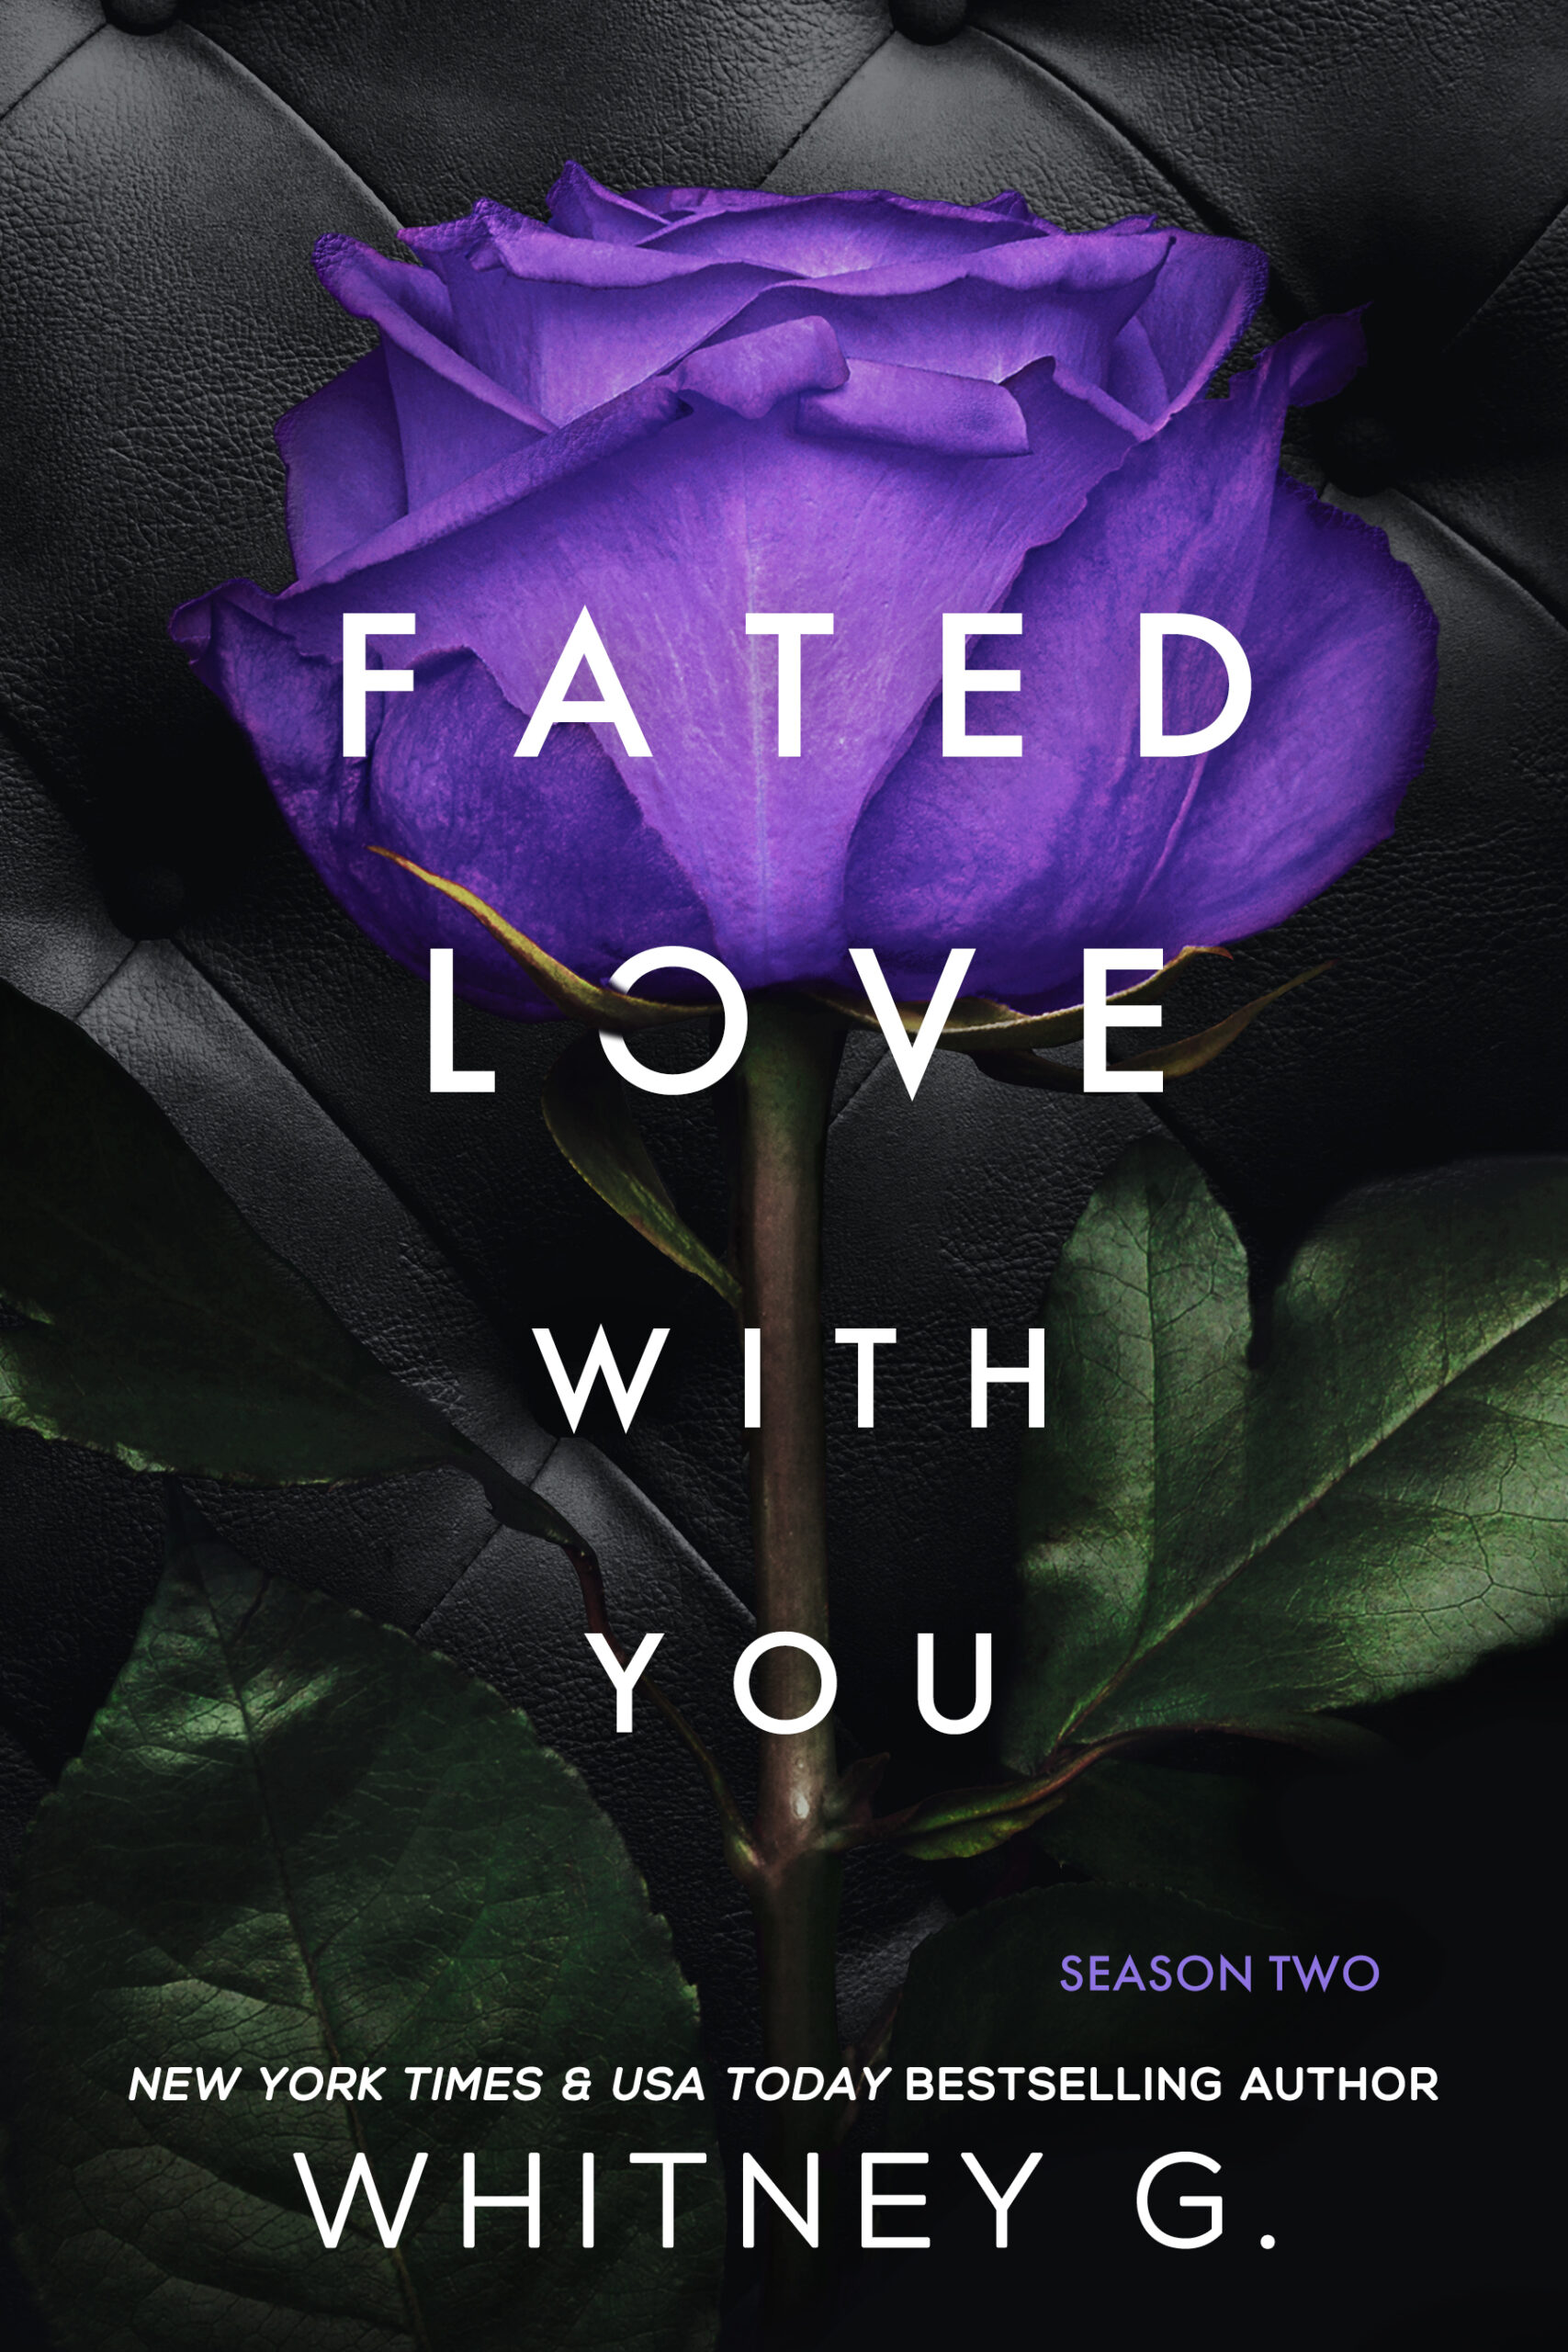 Fated Love with You: One More for the “Lavender Era”